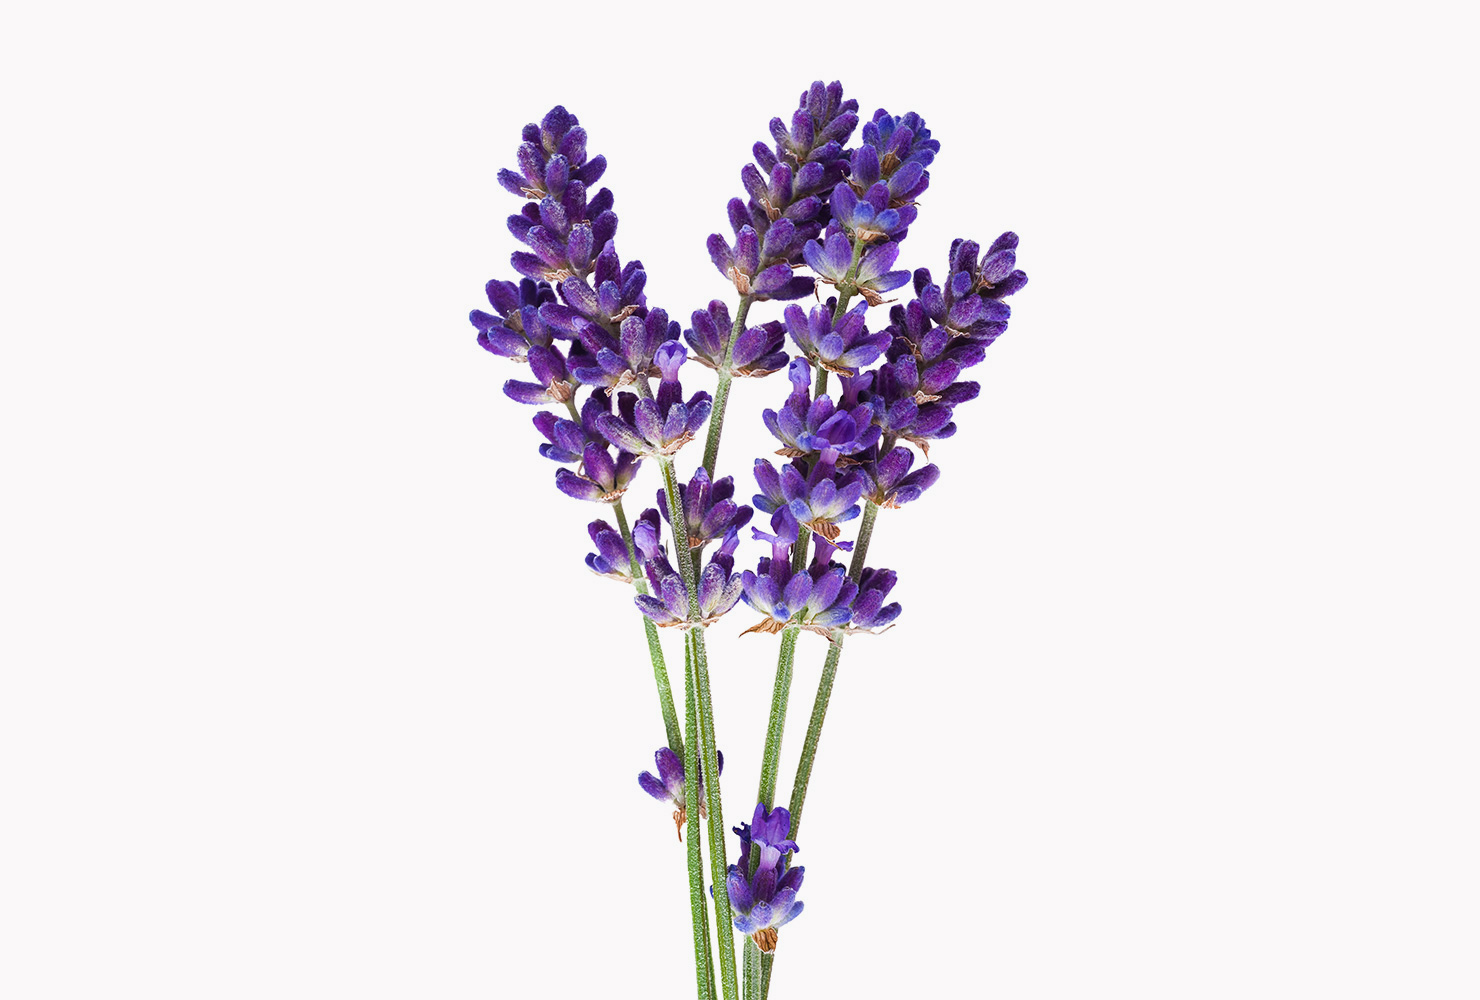 A bunch of lavender flowers.